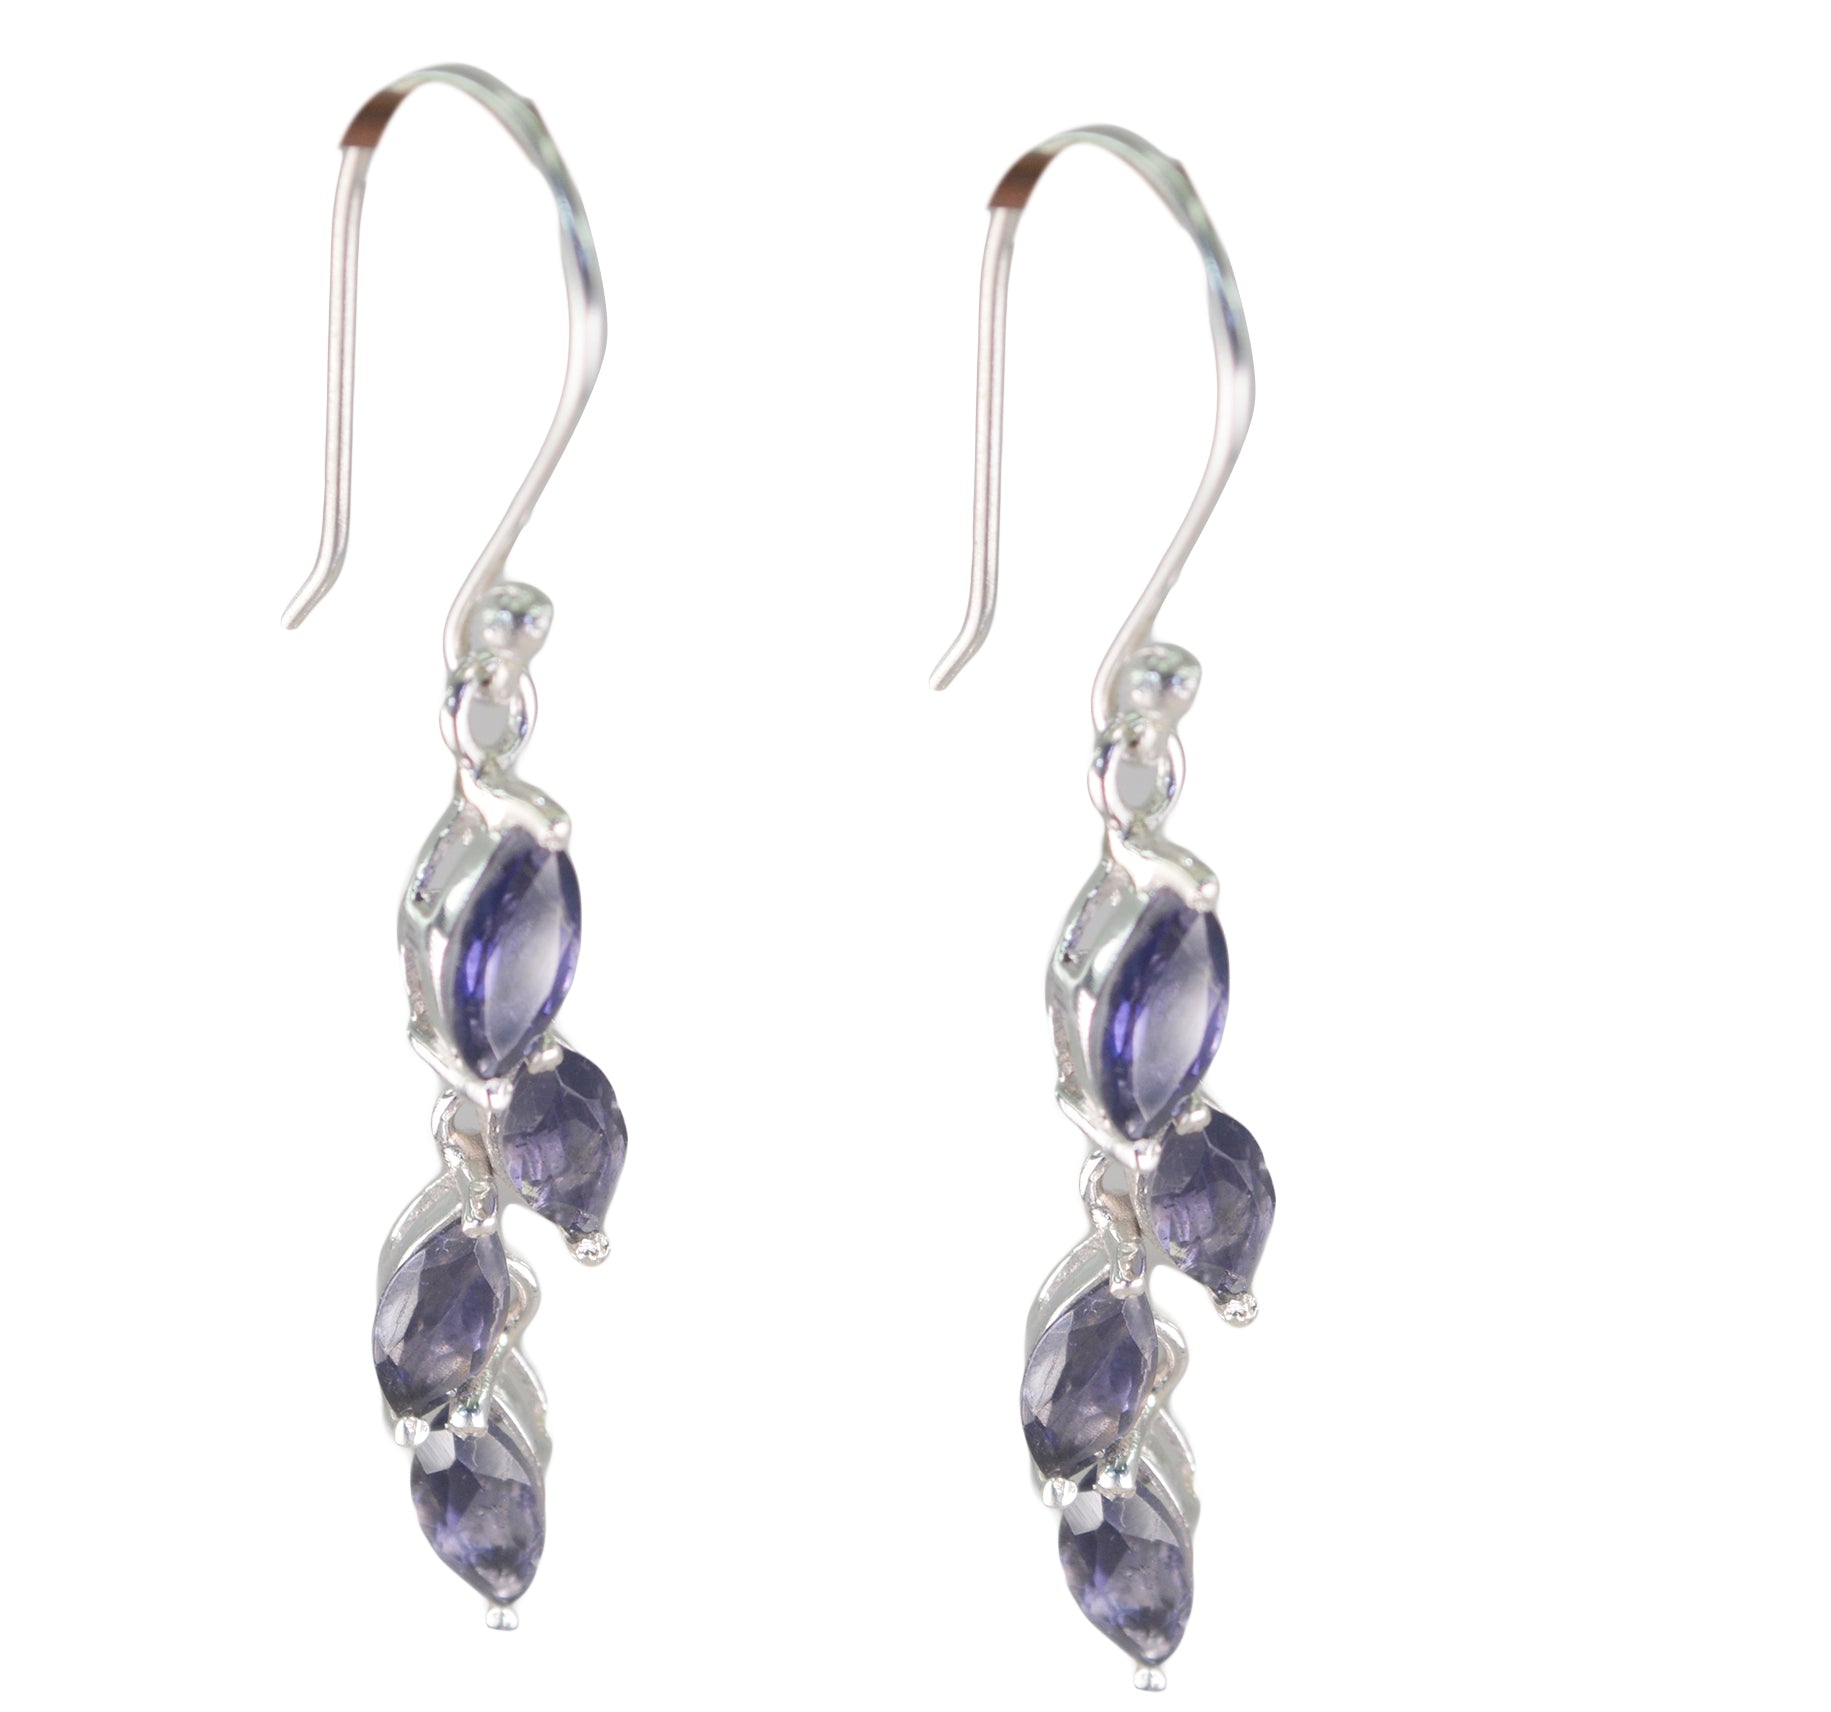 Riyo Genuine Gems marquise Faceted Nevy Blue Iolite Silver Earrings thanks giving gift